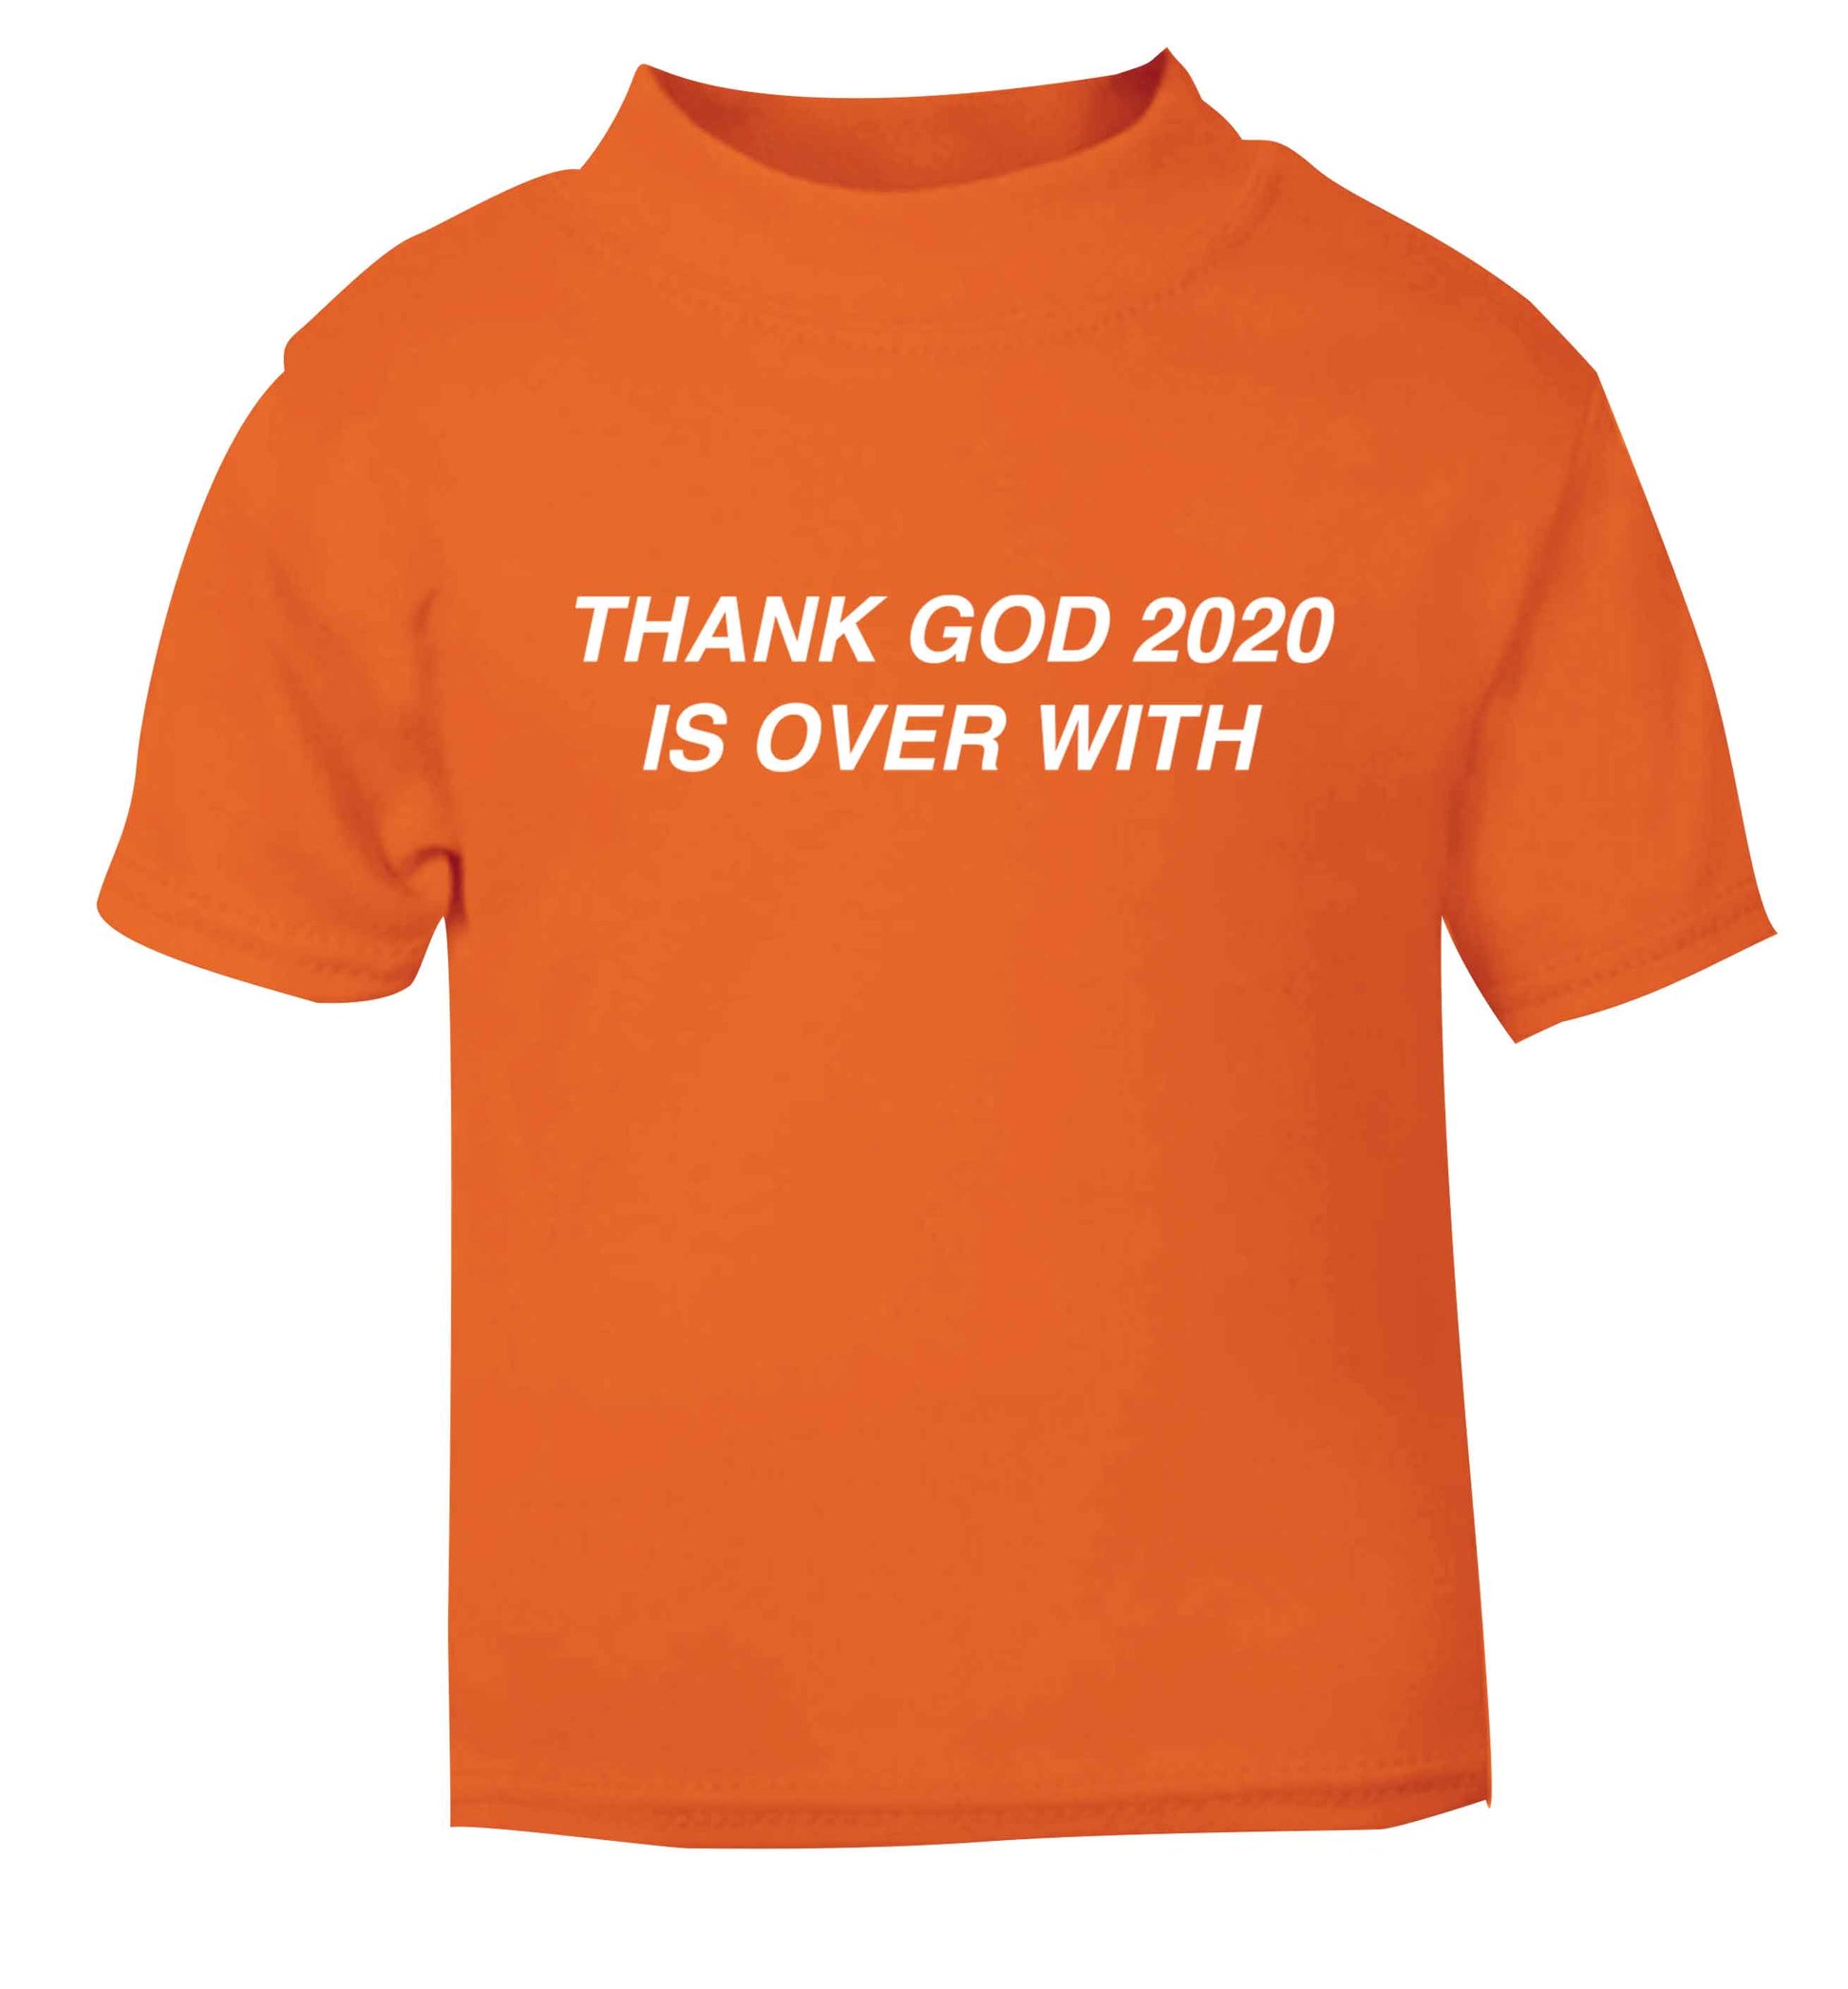 Thank god 2020 is over with orange baby toddler Tshirt 2 Years